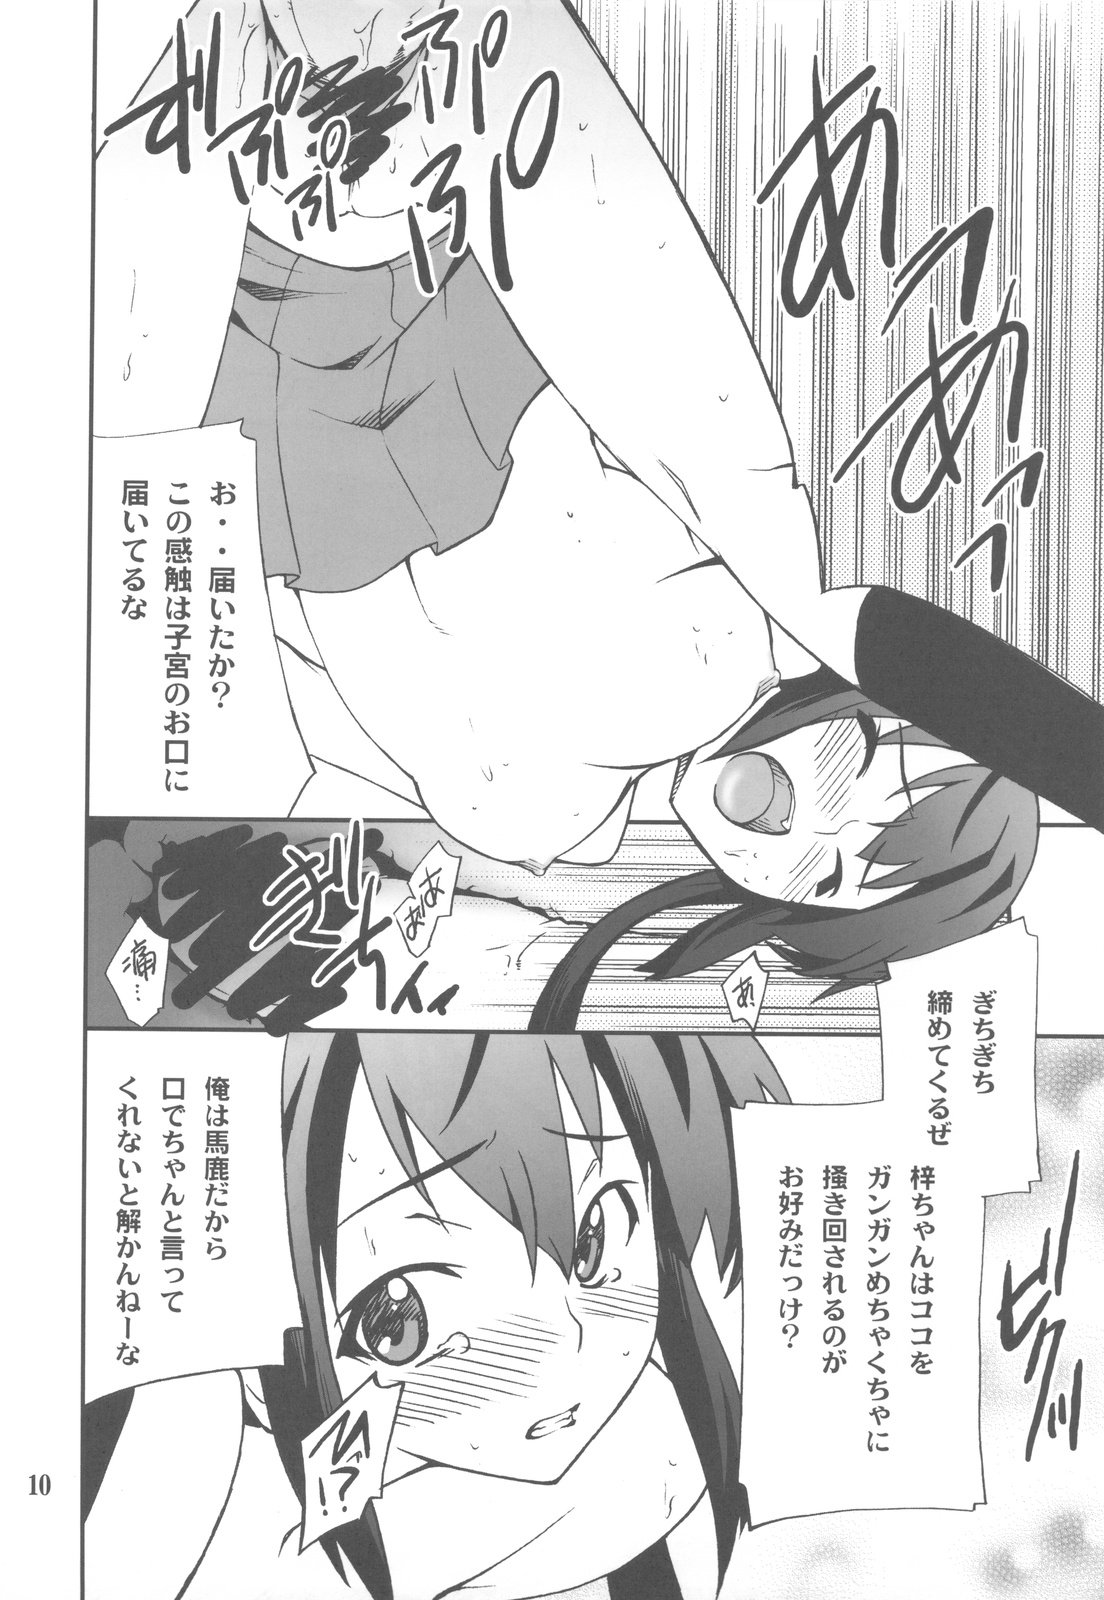 (COMIC1☆4) [P-FOREST] HXT Houkago XXX Time (K-ON!) (COMIC1☆4) (同人誌) [P-FOREST] HXT 放課後XXXタイム (けいおん！)